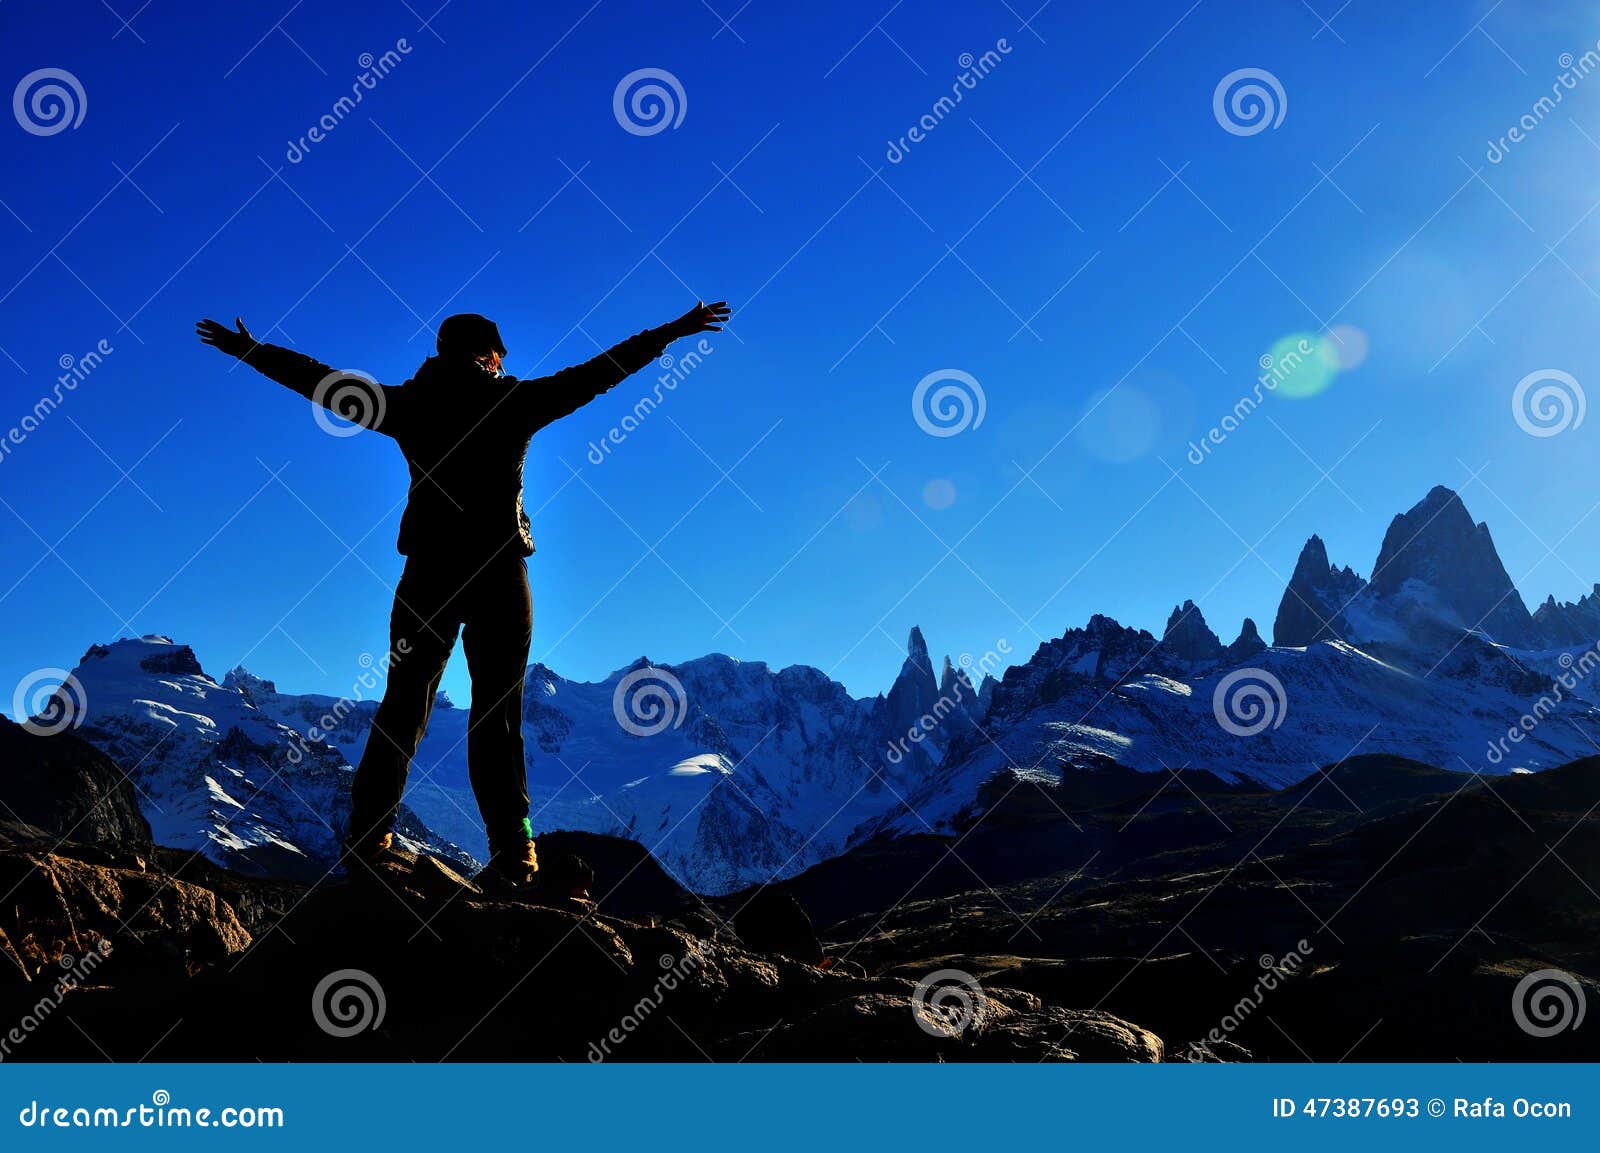 girl reaching the summit of the mountain in el chalten, argentina